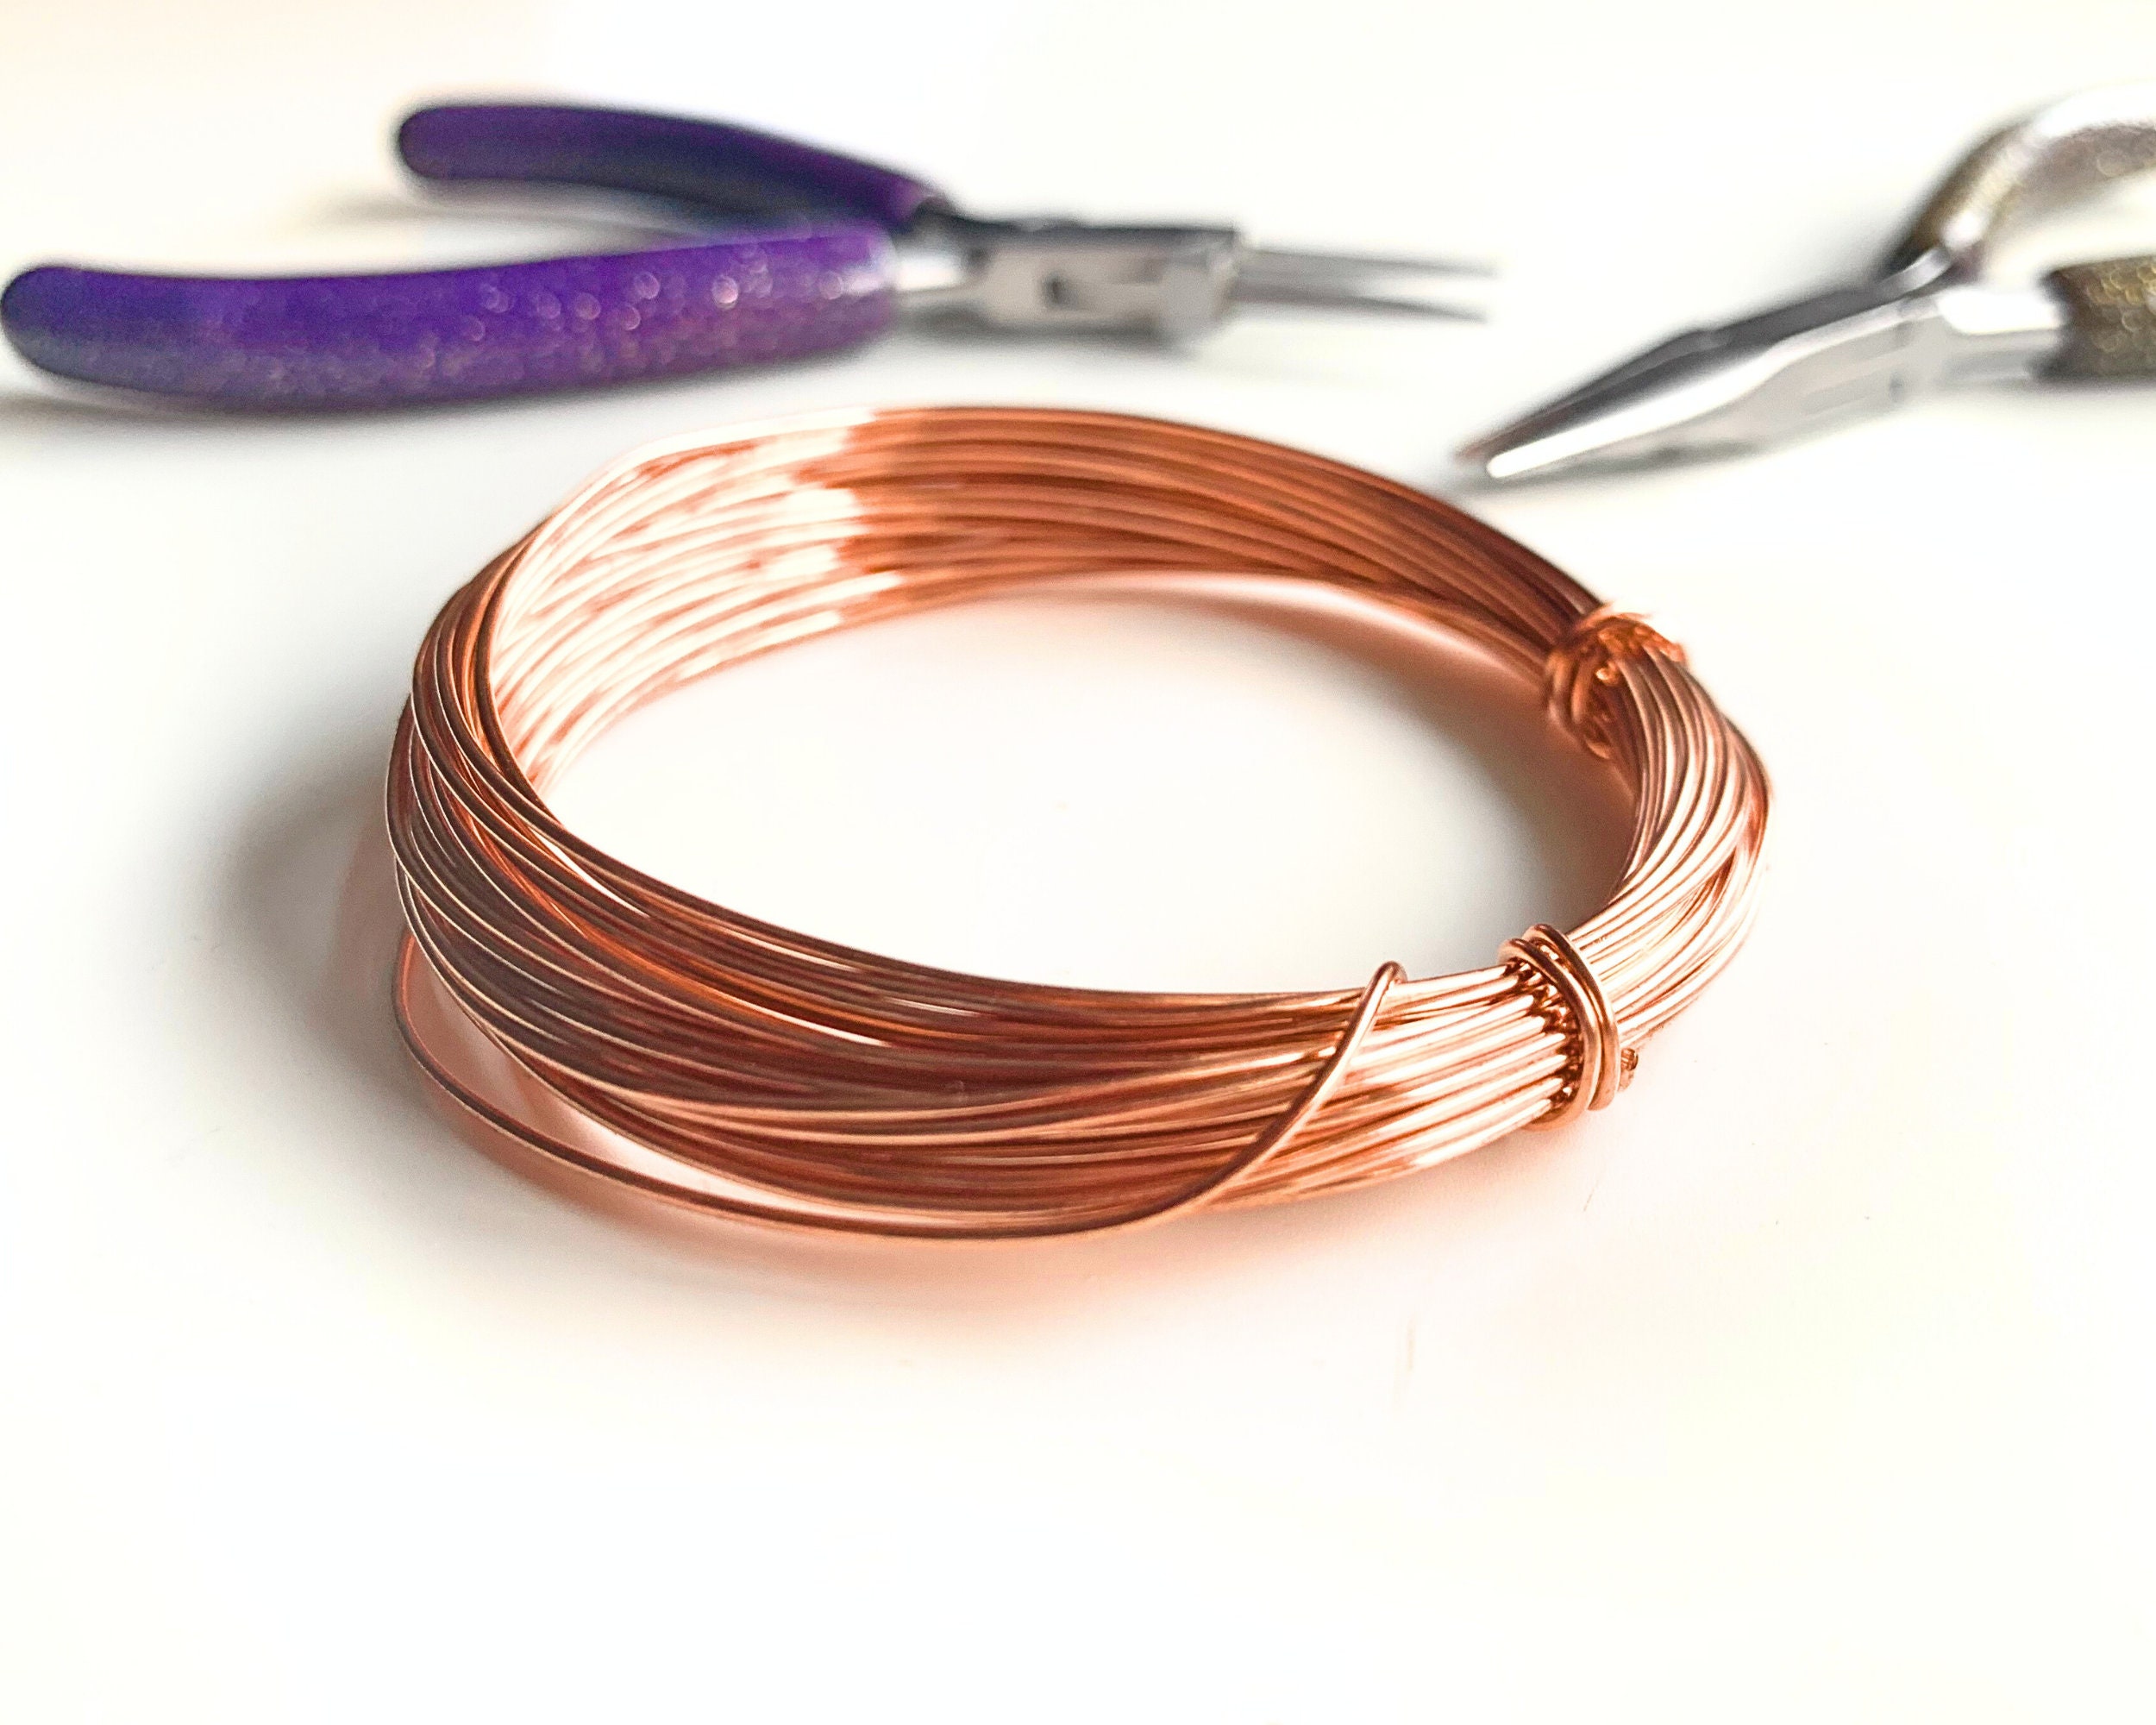 Copper Wire Round Solid Bare Uncoated 0.2mm 0.3mm 0.4mm 0.5mm 0.6